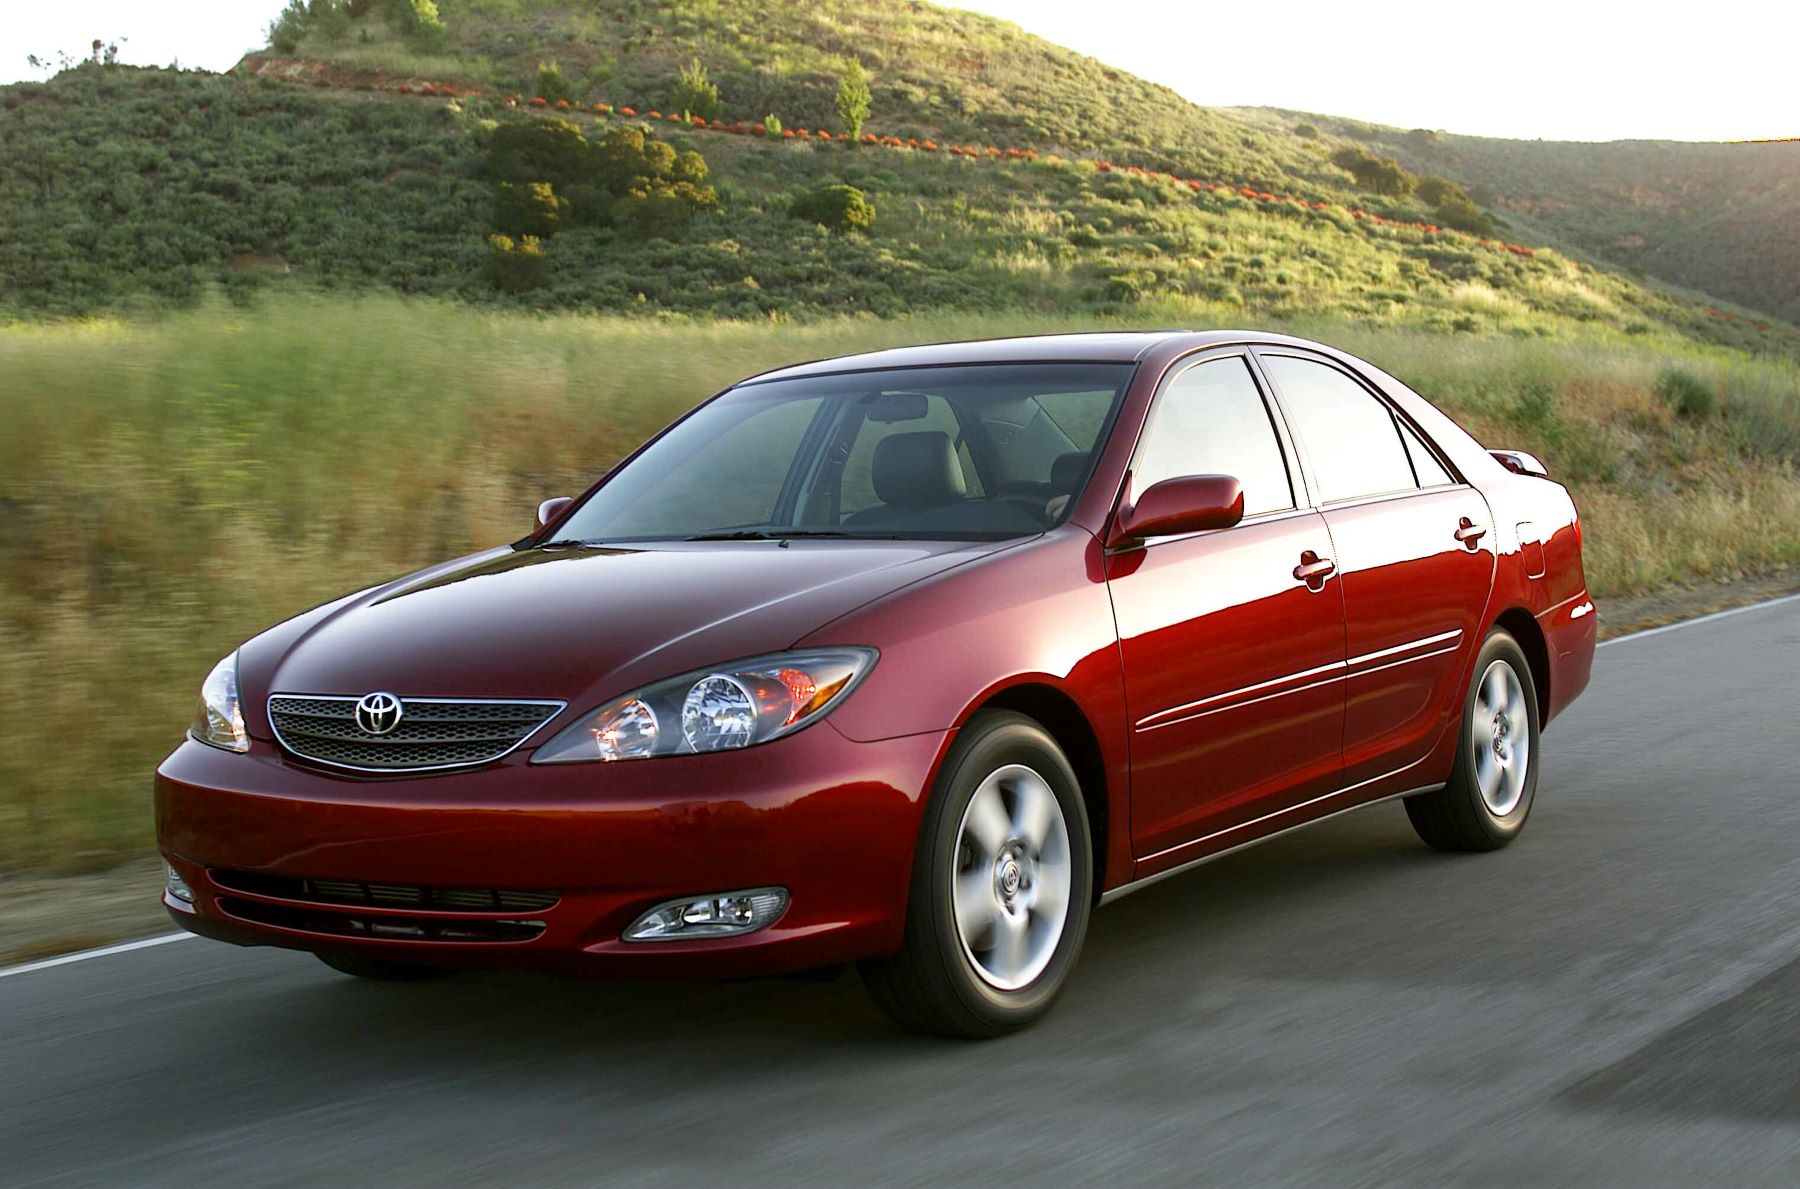 The 2004 Toyota Camry Is a Reliable Used Car for Under $10,000